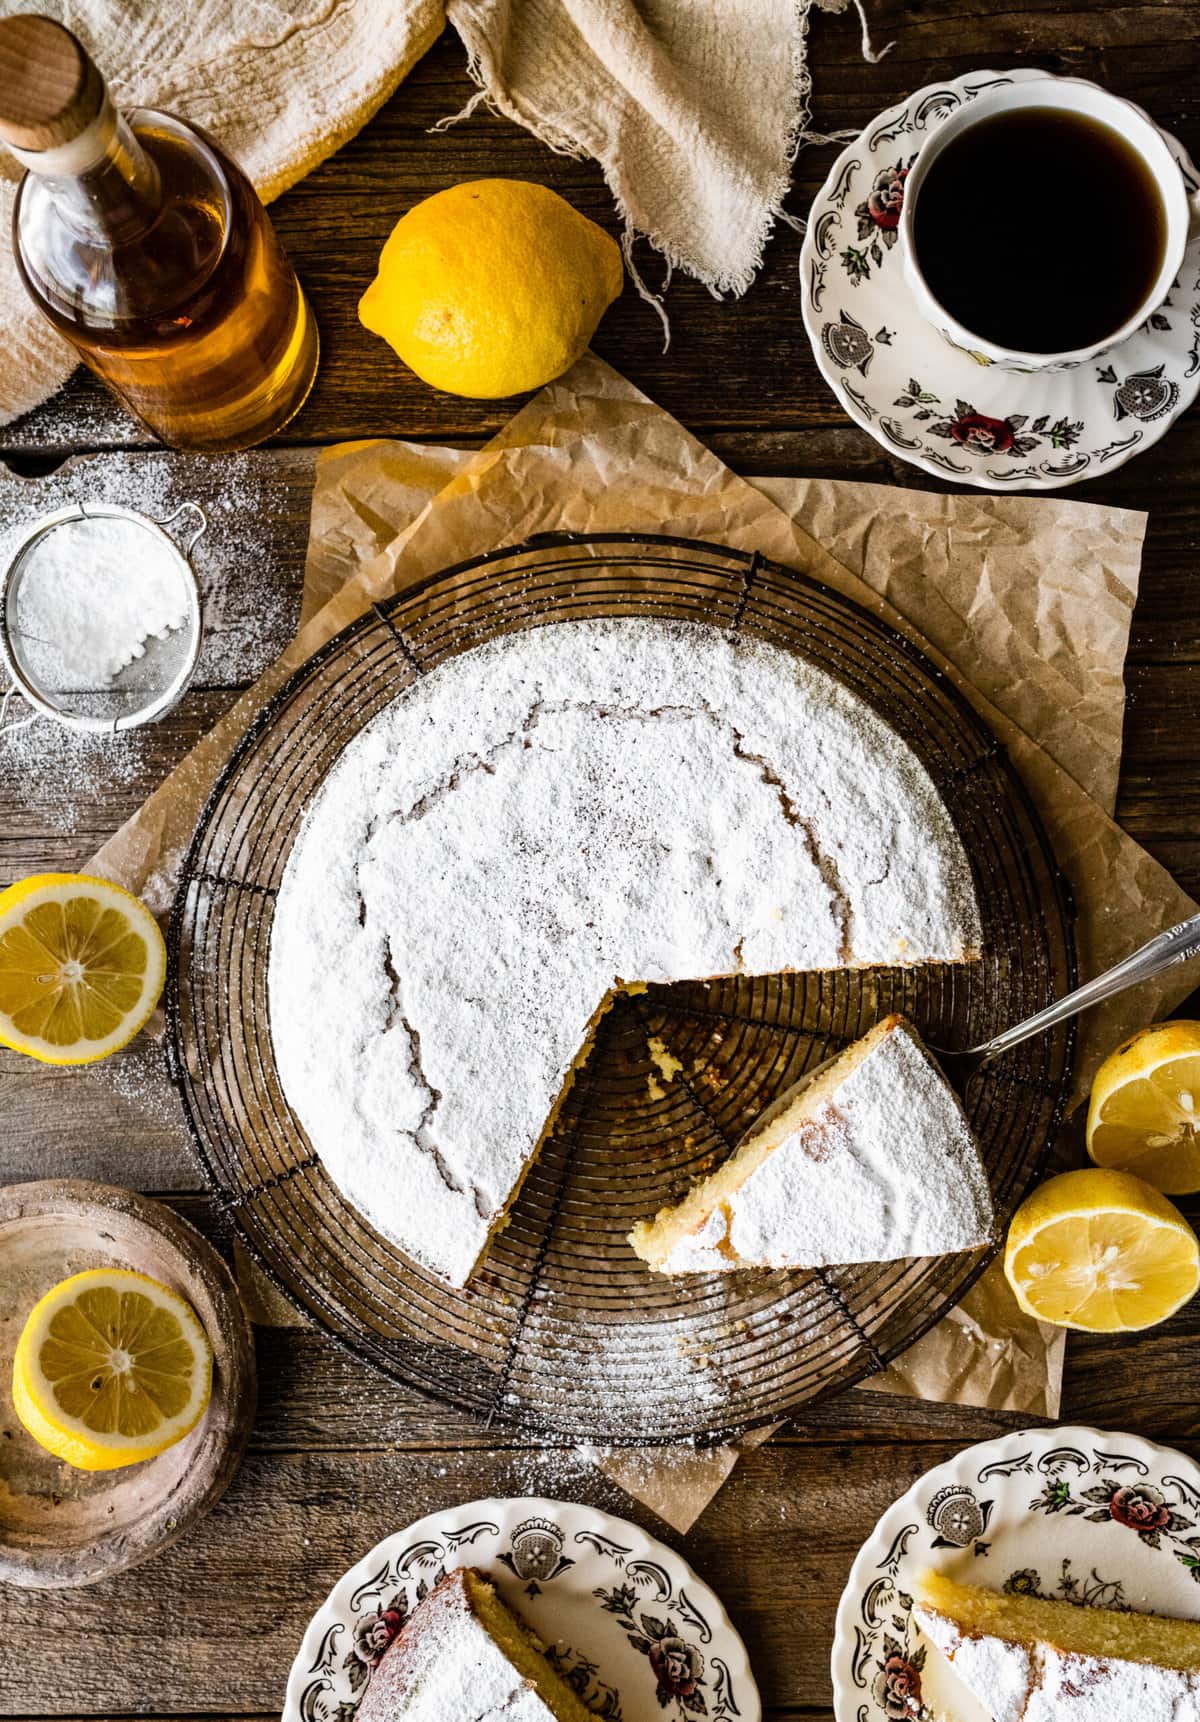 baked best olive oil cake with powdered sugar on a cooling rack with lemons around and bottle of olive oil. Slice taken out of cake.